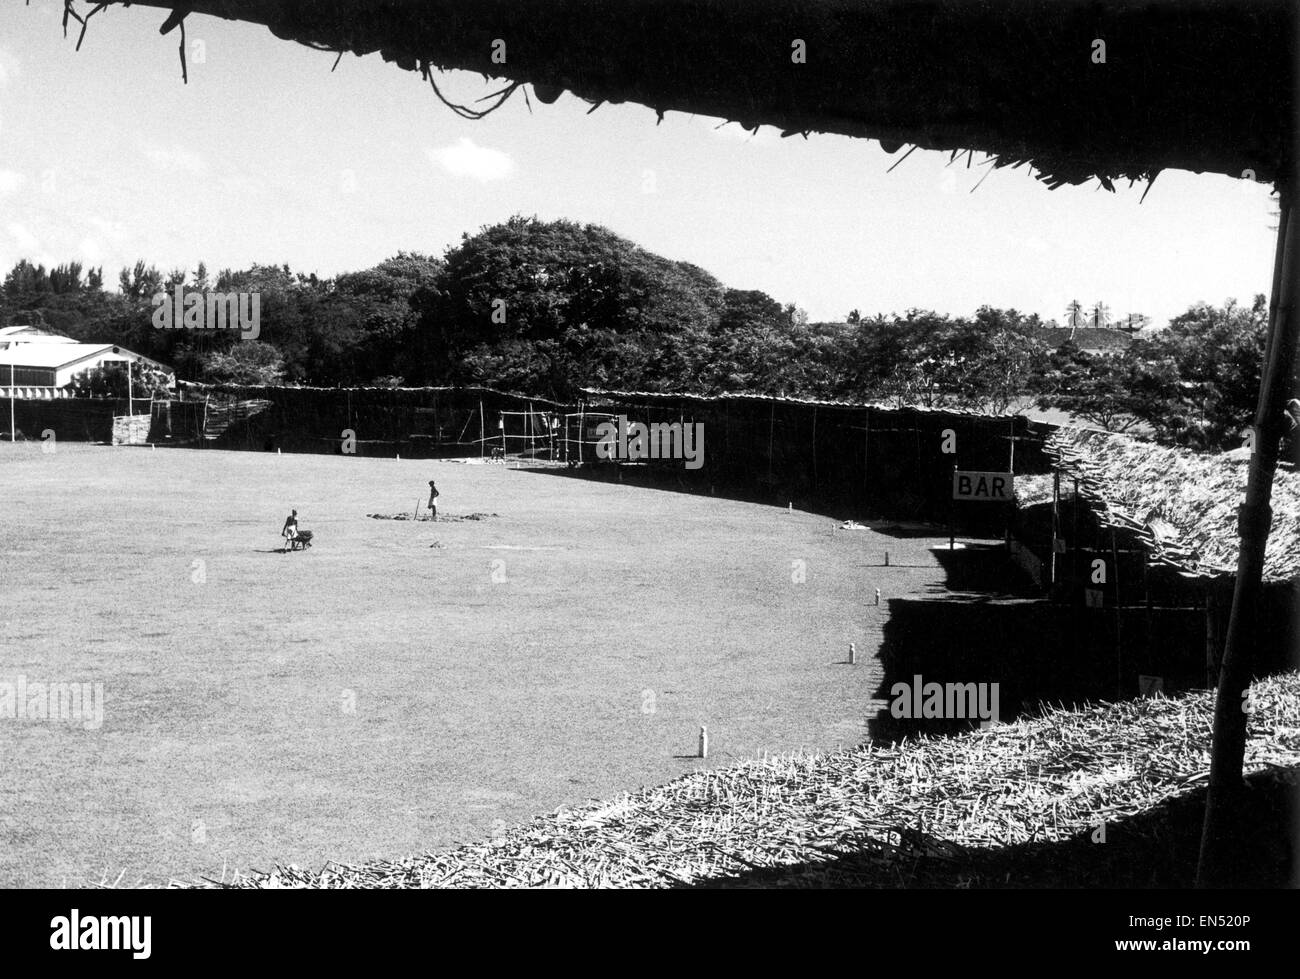 A view of the Sinhalese Sports Club grounds in Colombo, Sri Lanka where the MCC team will play 2 matches against Ceylon teams. Temporary sheds have been erected to accomodate spectators. October 1958. Stock Photo